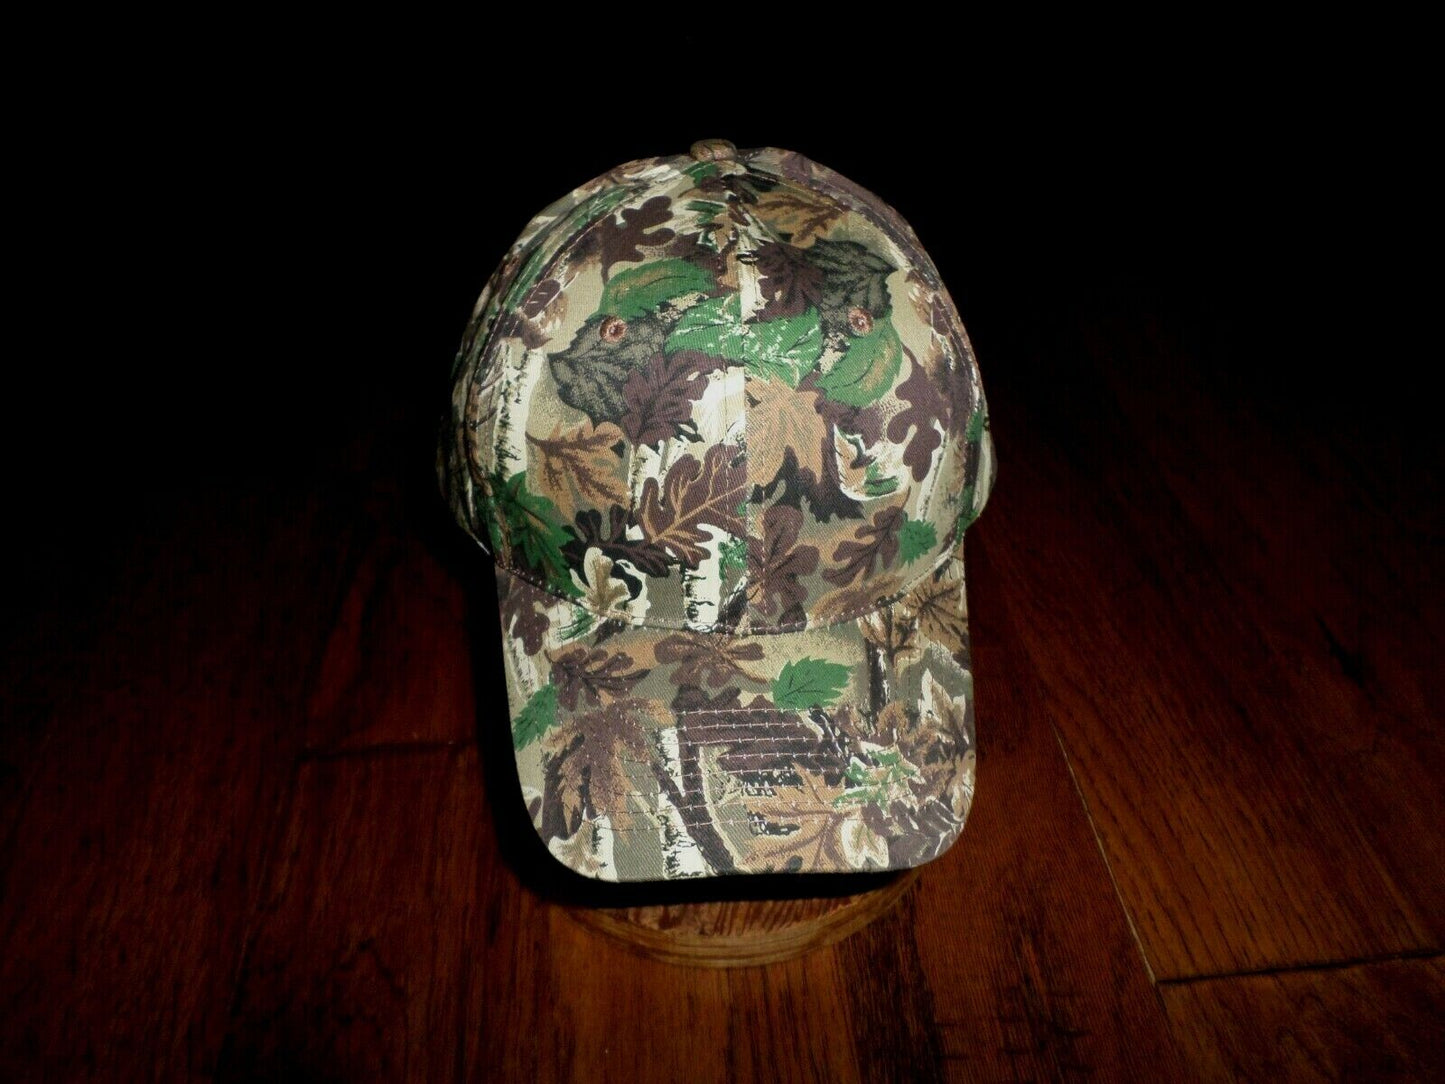 NEW CAMOUFLAGE HAT HUNTING BALL CAP ADJUSTABLE SNAPBACK